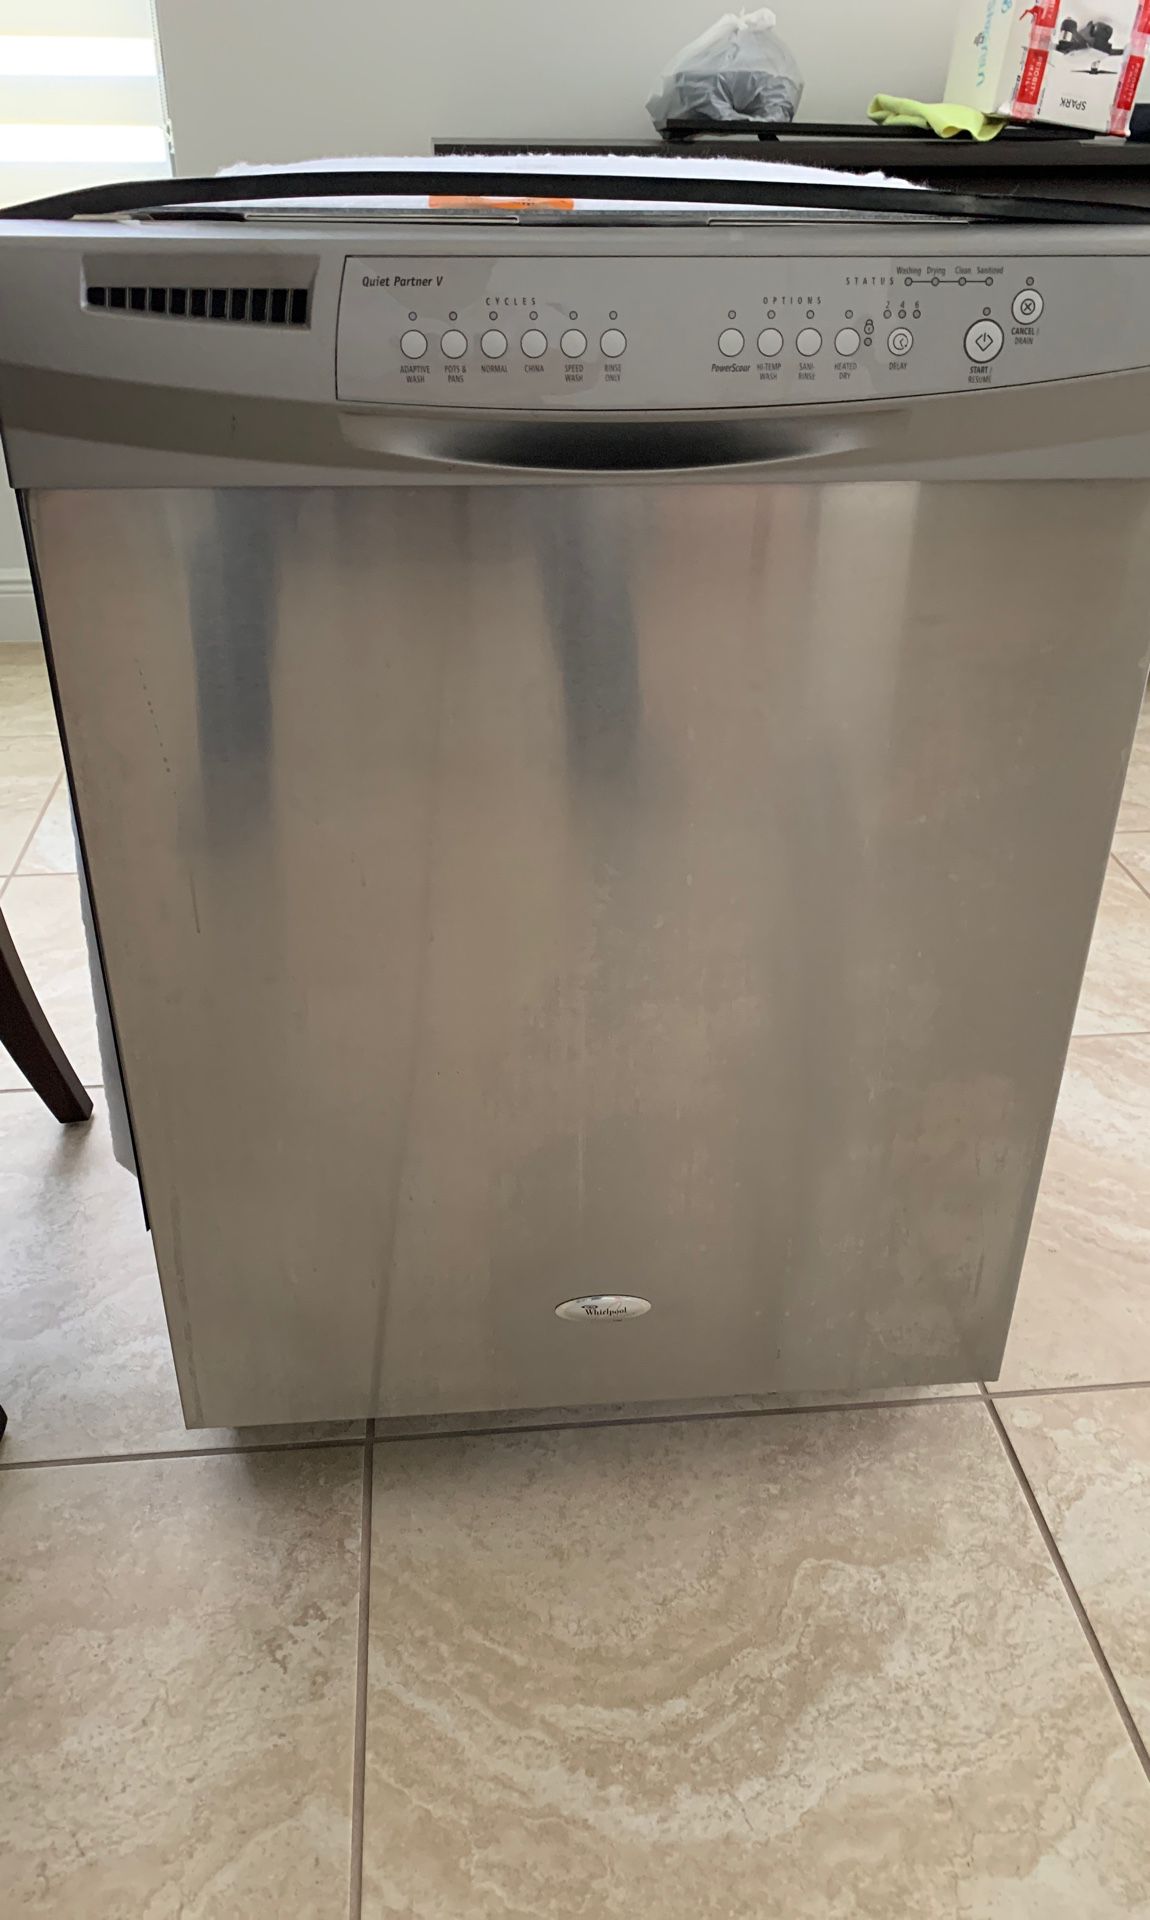 Dishwasher Whirlpool quiet partner V Good condition or parts